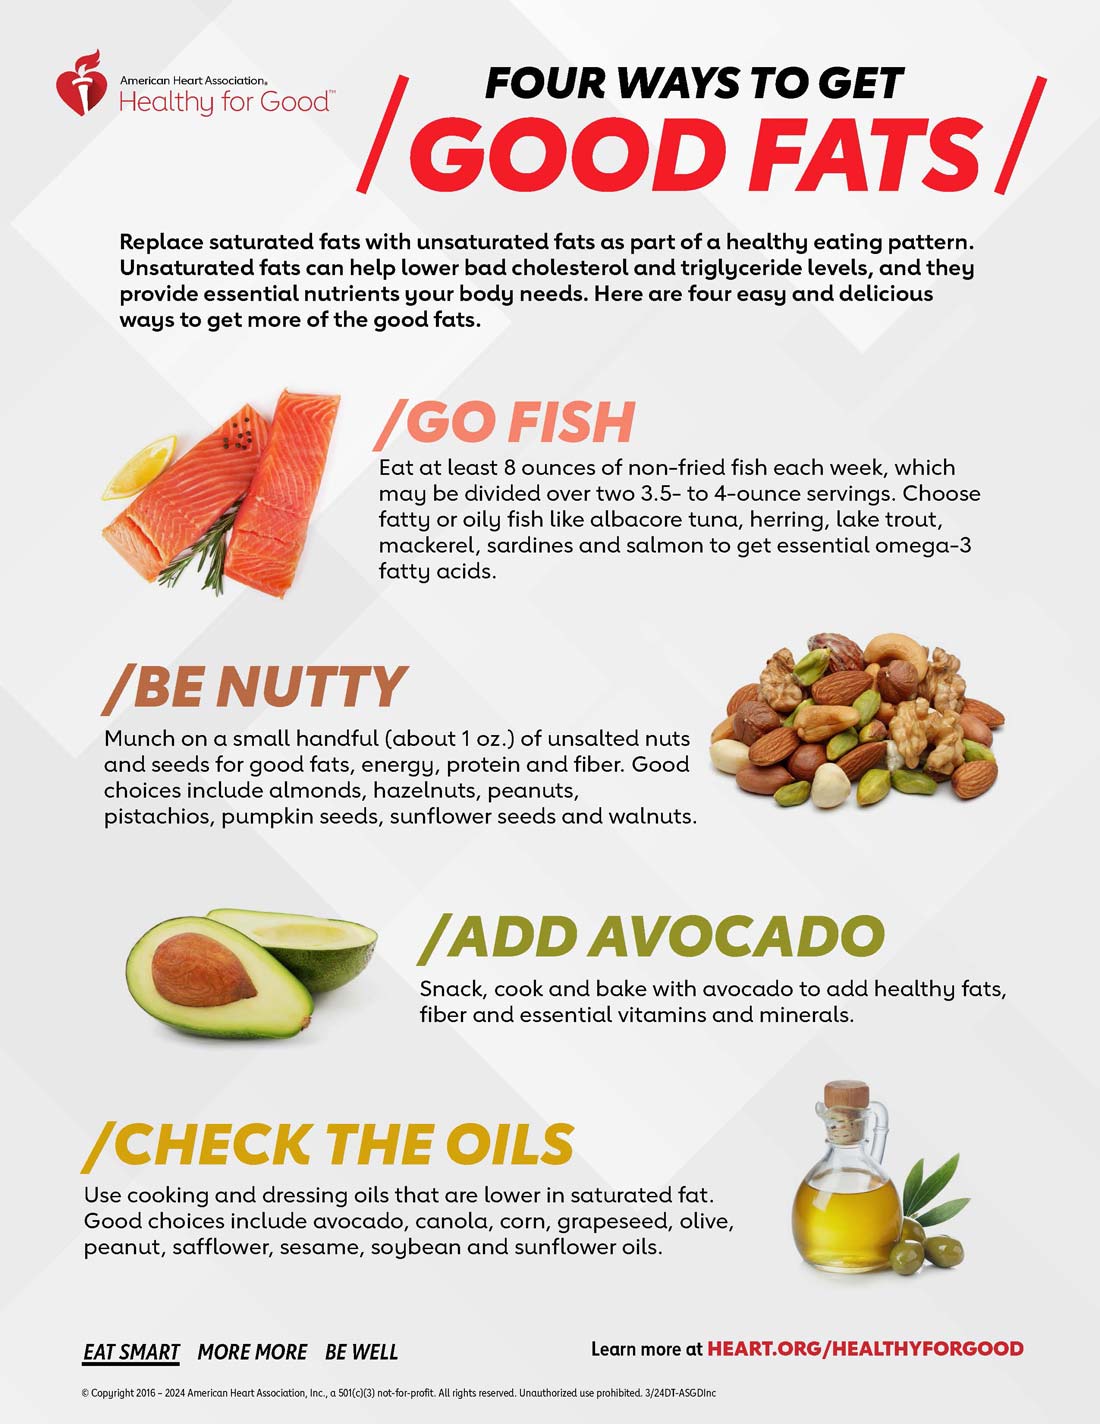 Cooking with healthy fats